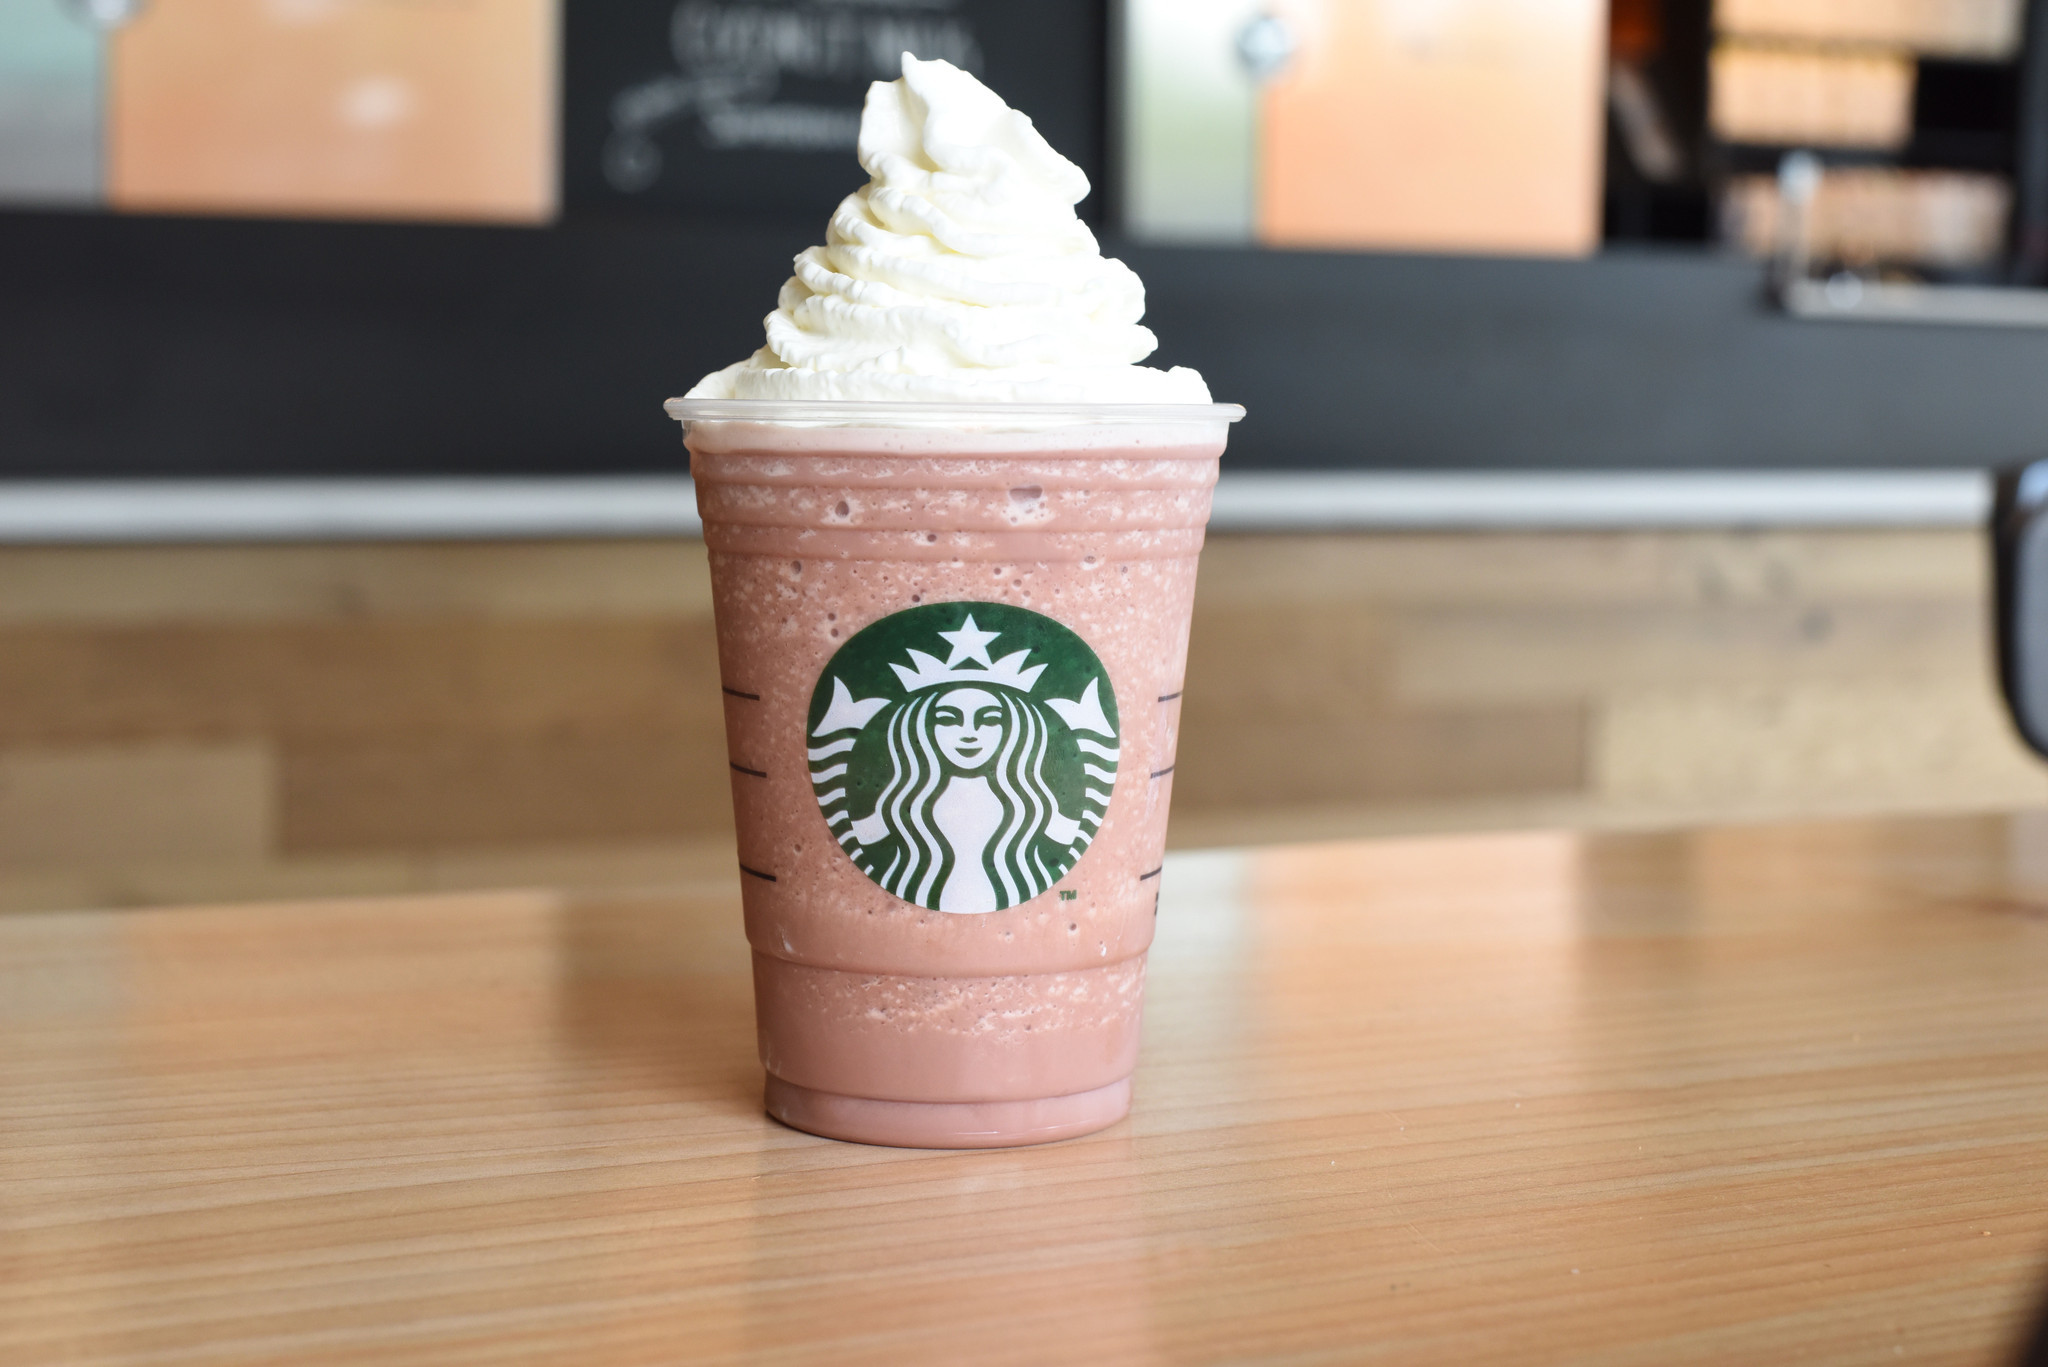 Whats the cheapest frappuccino at starbucks